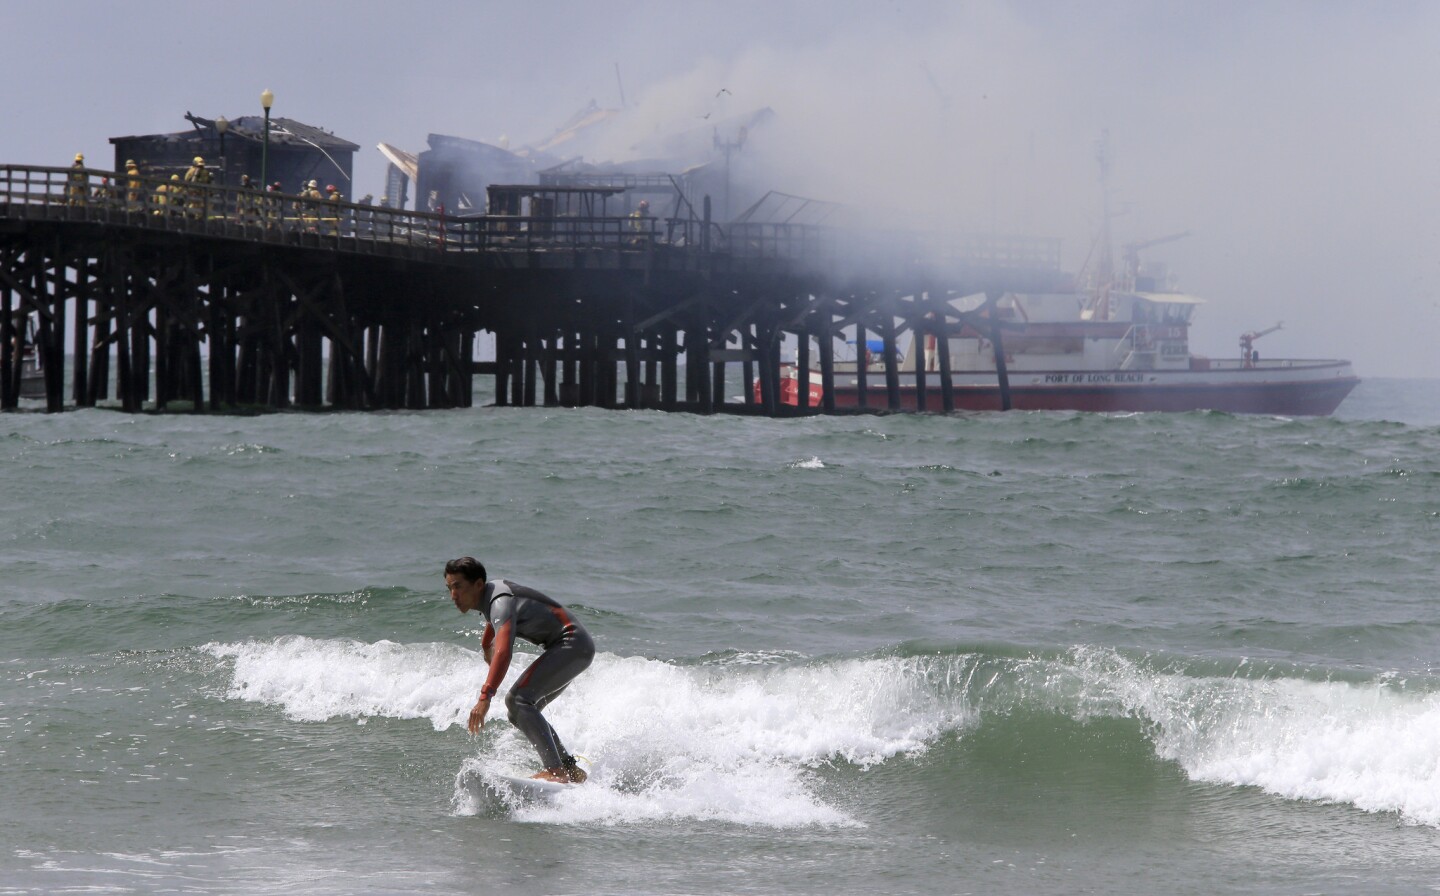 Firefighters mop up a blaze at the end of the Seal Beach Pier Friday morning as a surfer catches a wave.